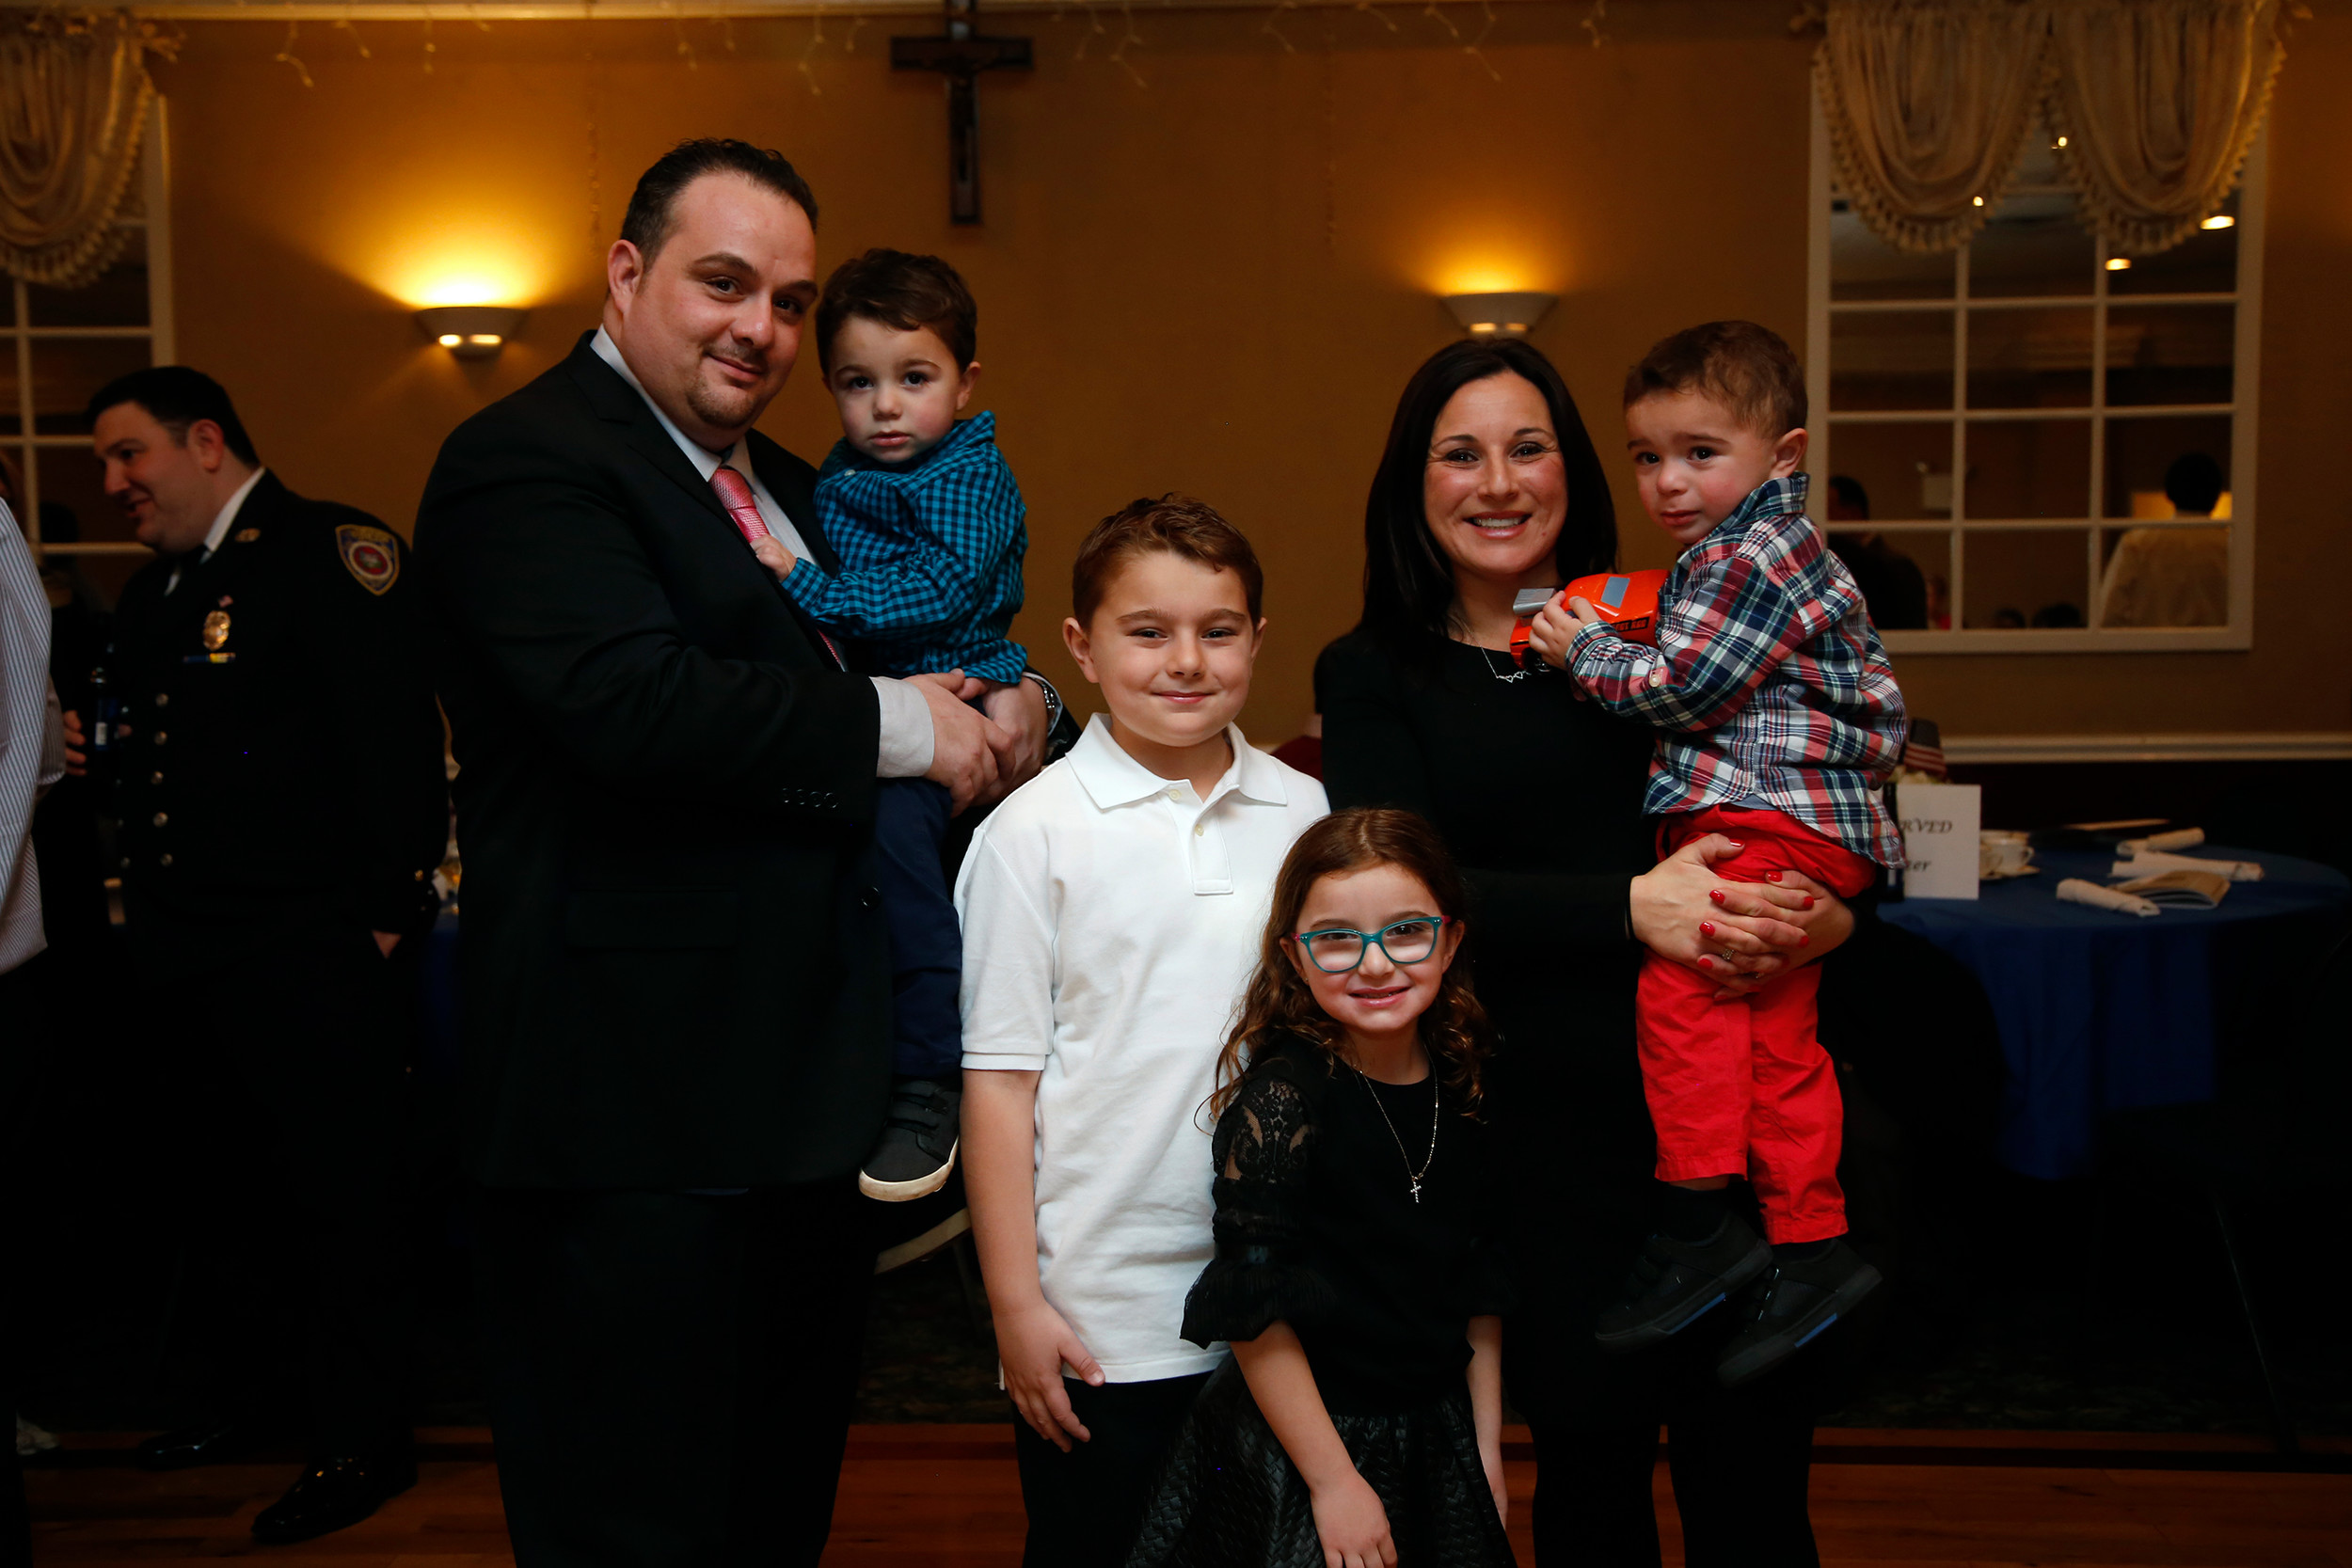 Bryan Lanzello, left, celebrated with his family after his company, Lanzello Roofing and Remodeling, Inc., was named Business of the Year at Lynbrook Mayor Bill Hendrick’s annual awards ceremony at the Saint Mary’s Knights of Columbus on Feb. 17.